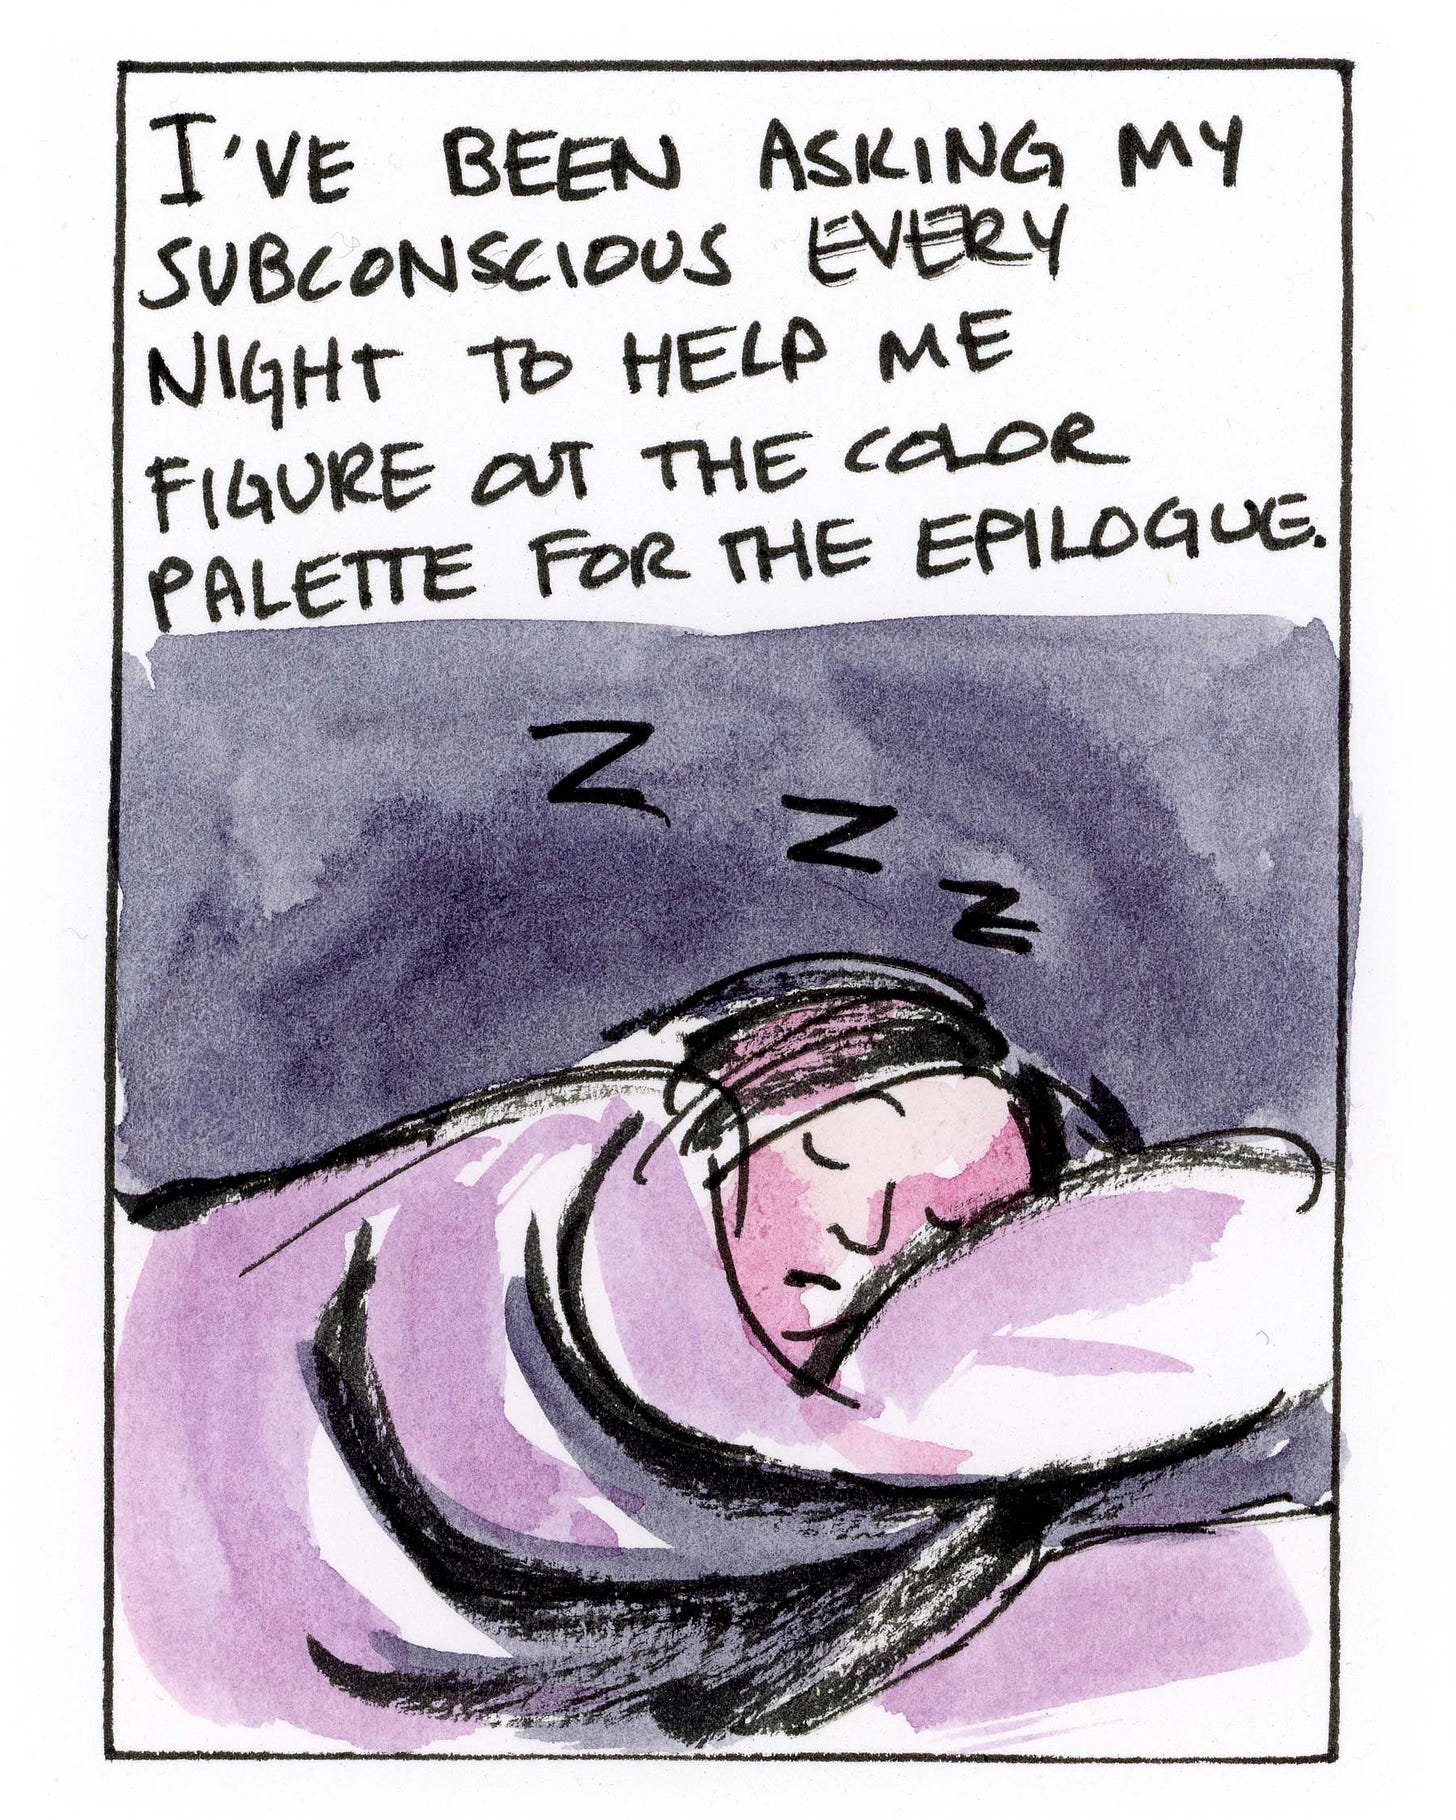 Watercolor diary comic by graphic novelist K. Woodman-Maynard on the subconscious.